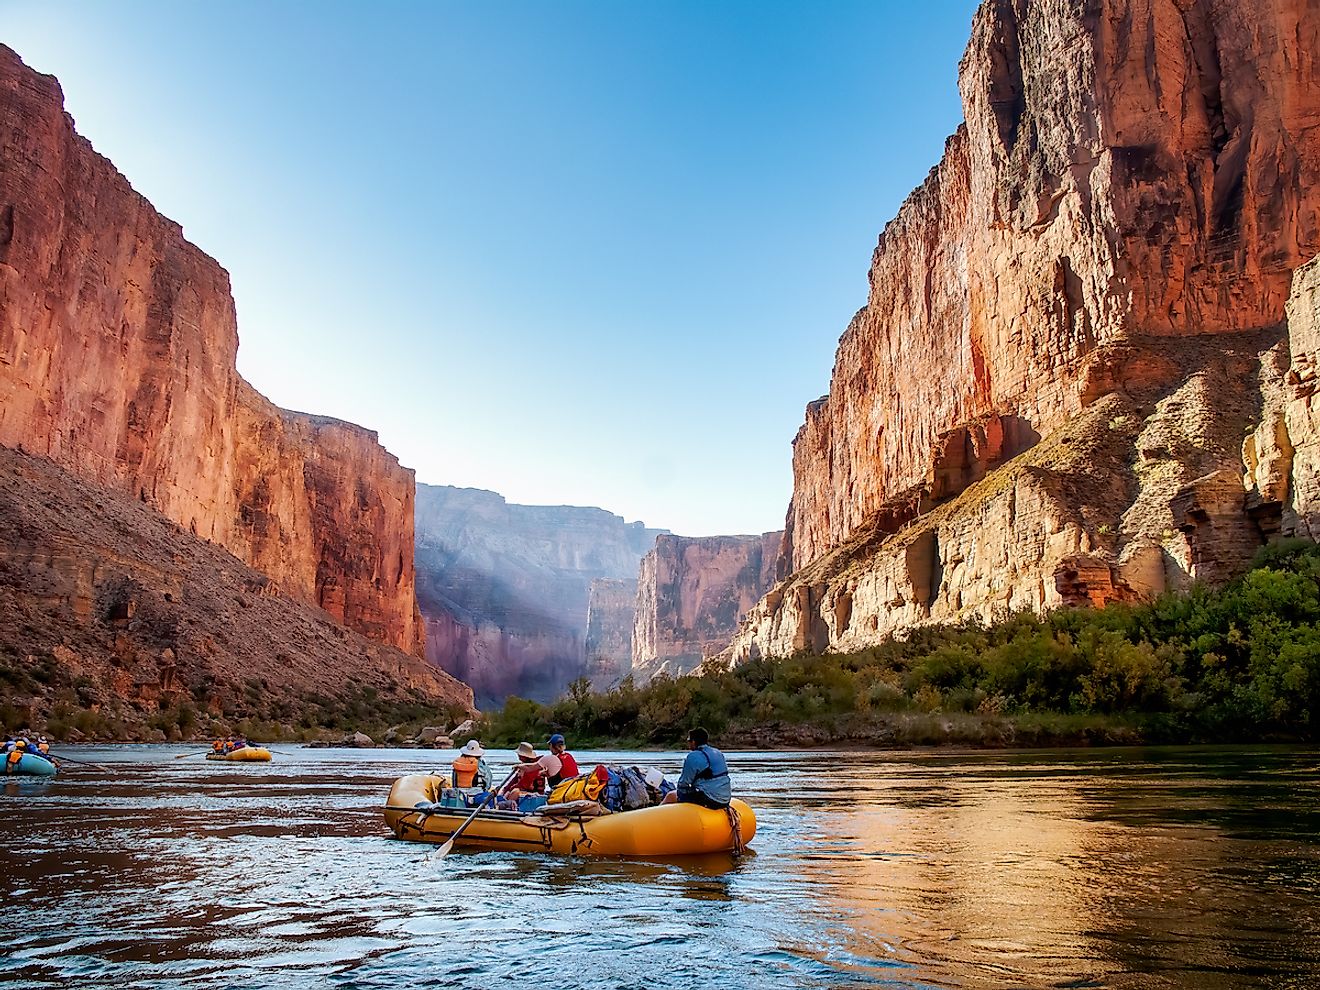 Rafting on The Colorado River in the Gran Canyon at sunrise. Image credit: Jim Mallouk/Shutterstock.com